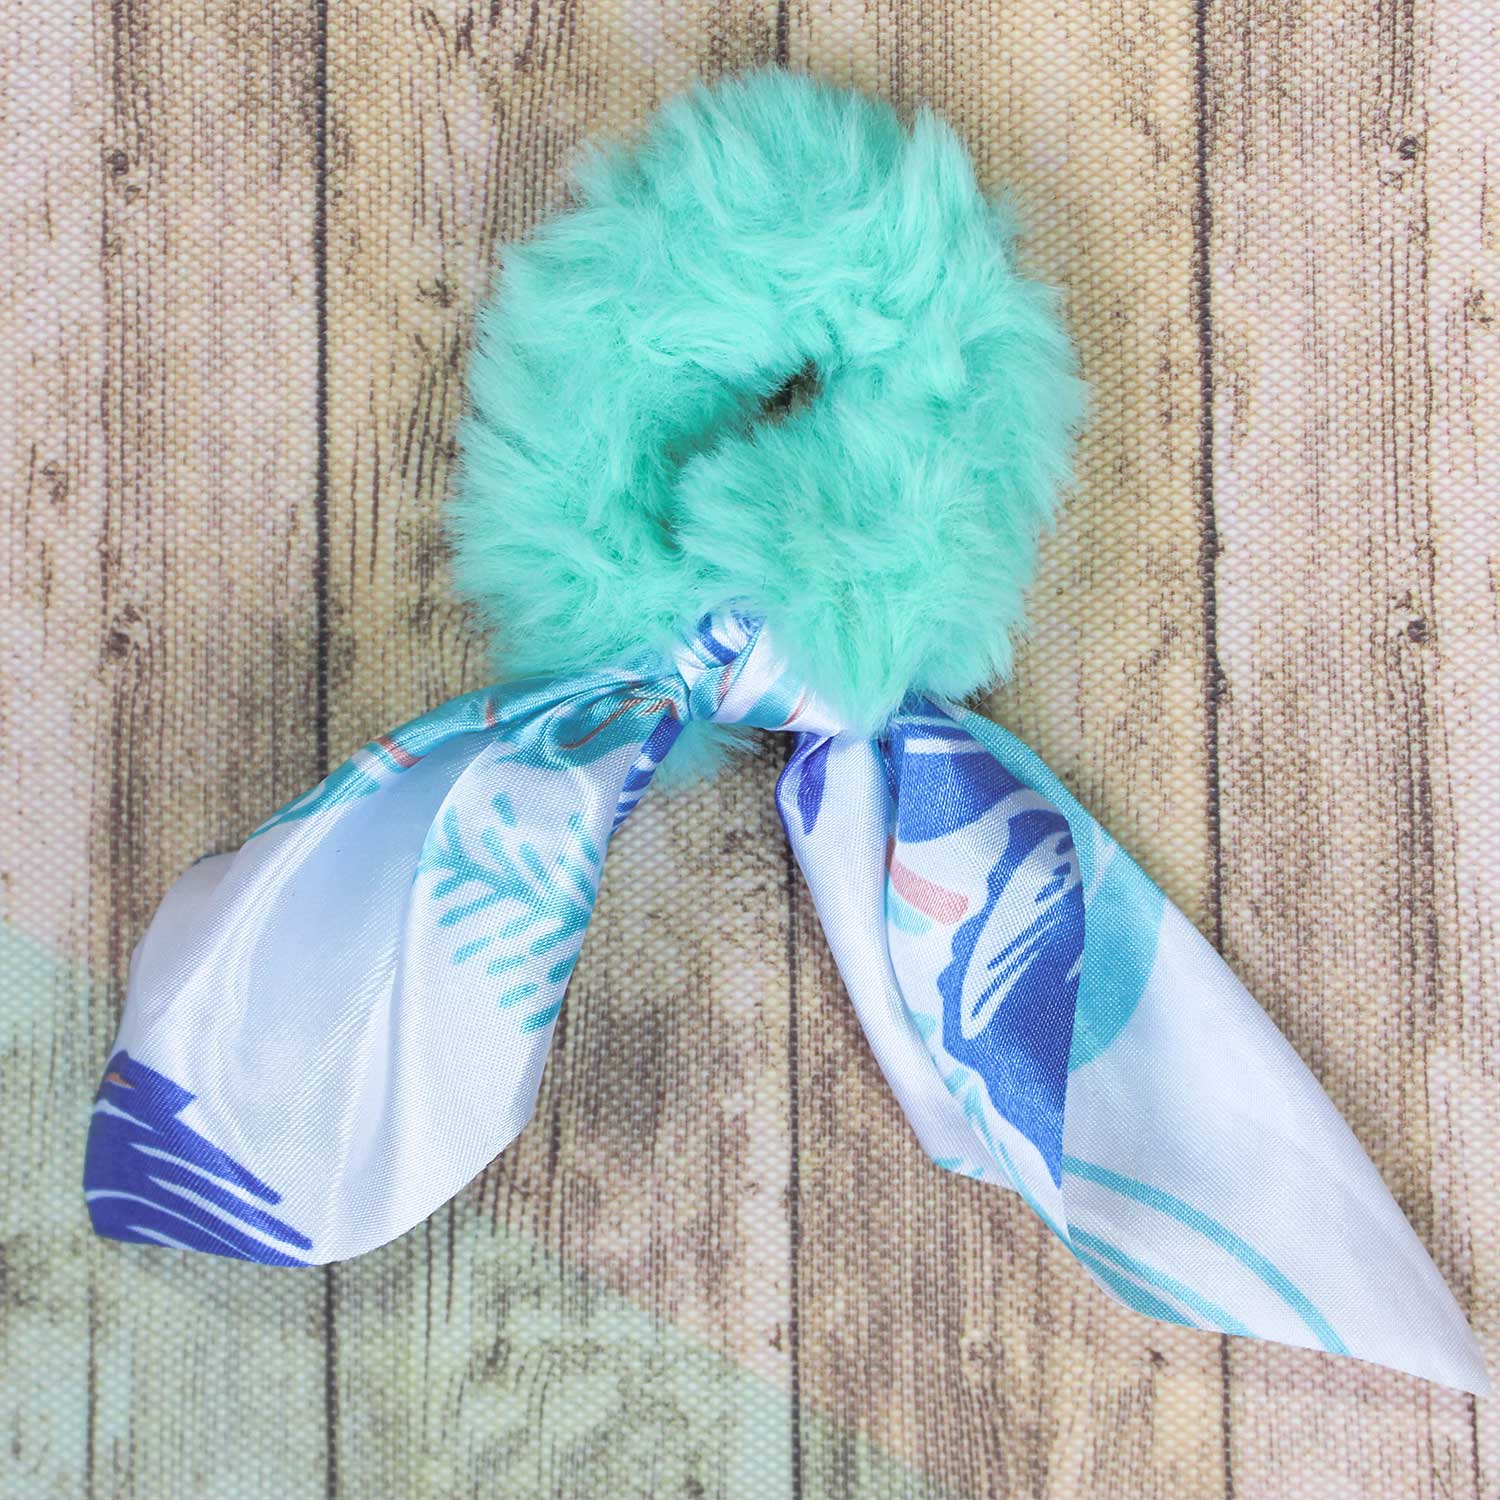 Fabric Hair Bow - FREE PATTERN - Notions - The Connecting Threads Staff Blog